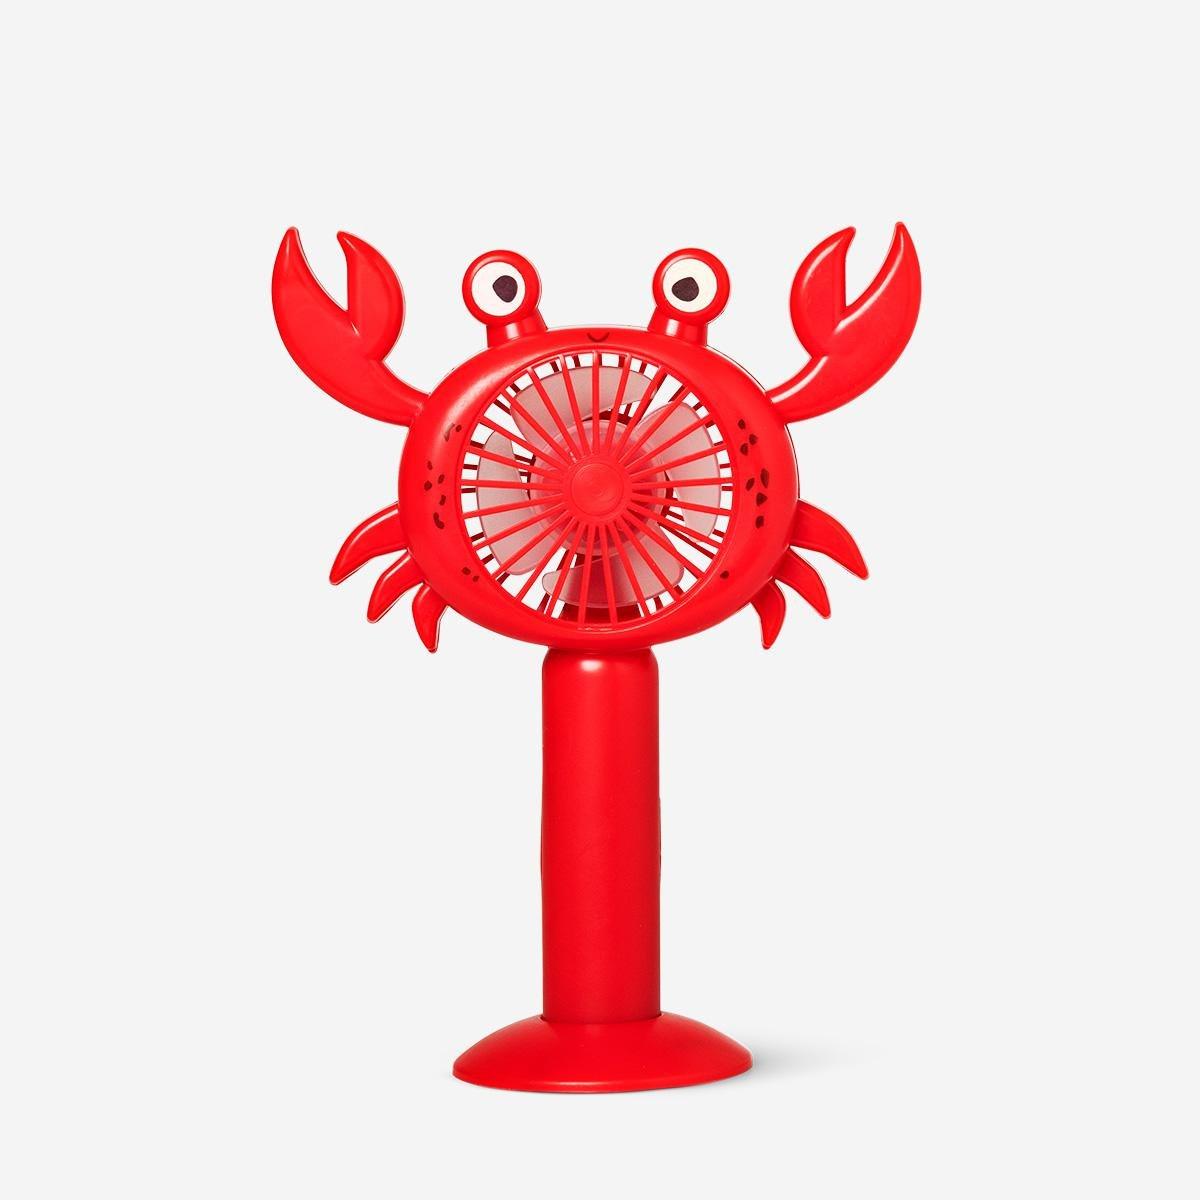 Red rechargeable handheld crab fan